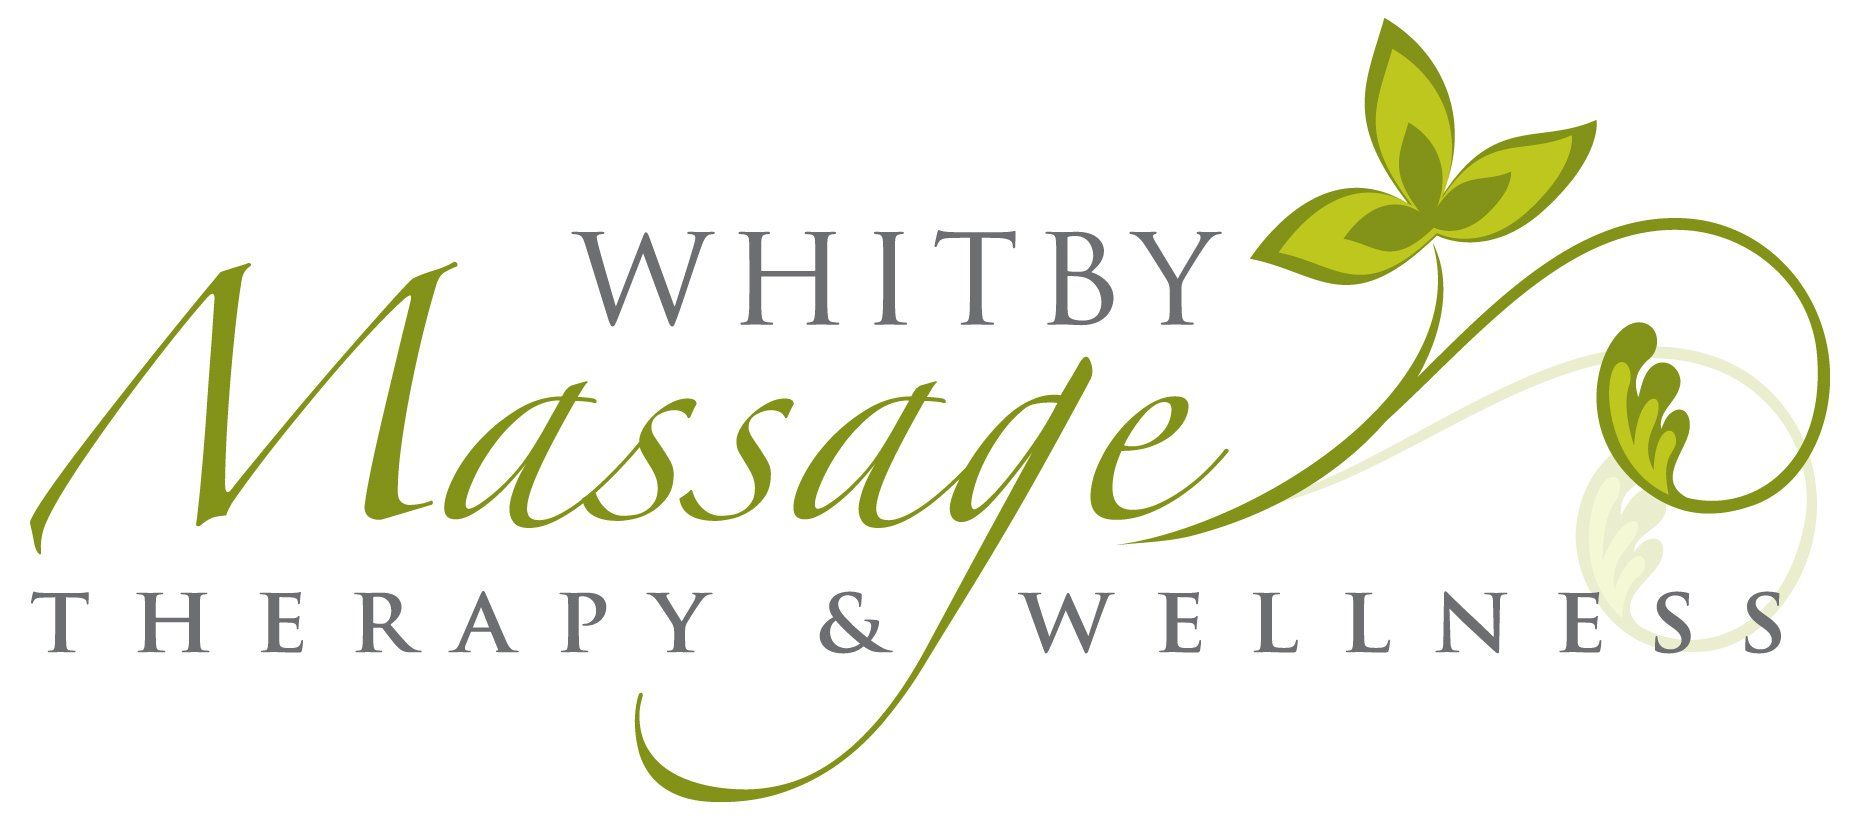 Whitby Massage Therapy Durham Region Massage Therapy